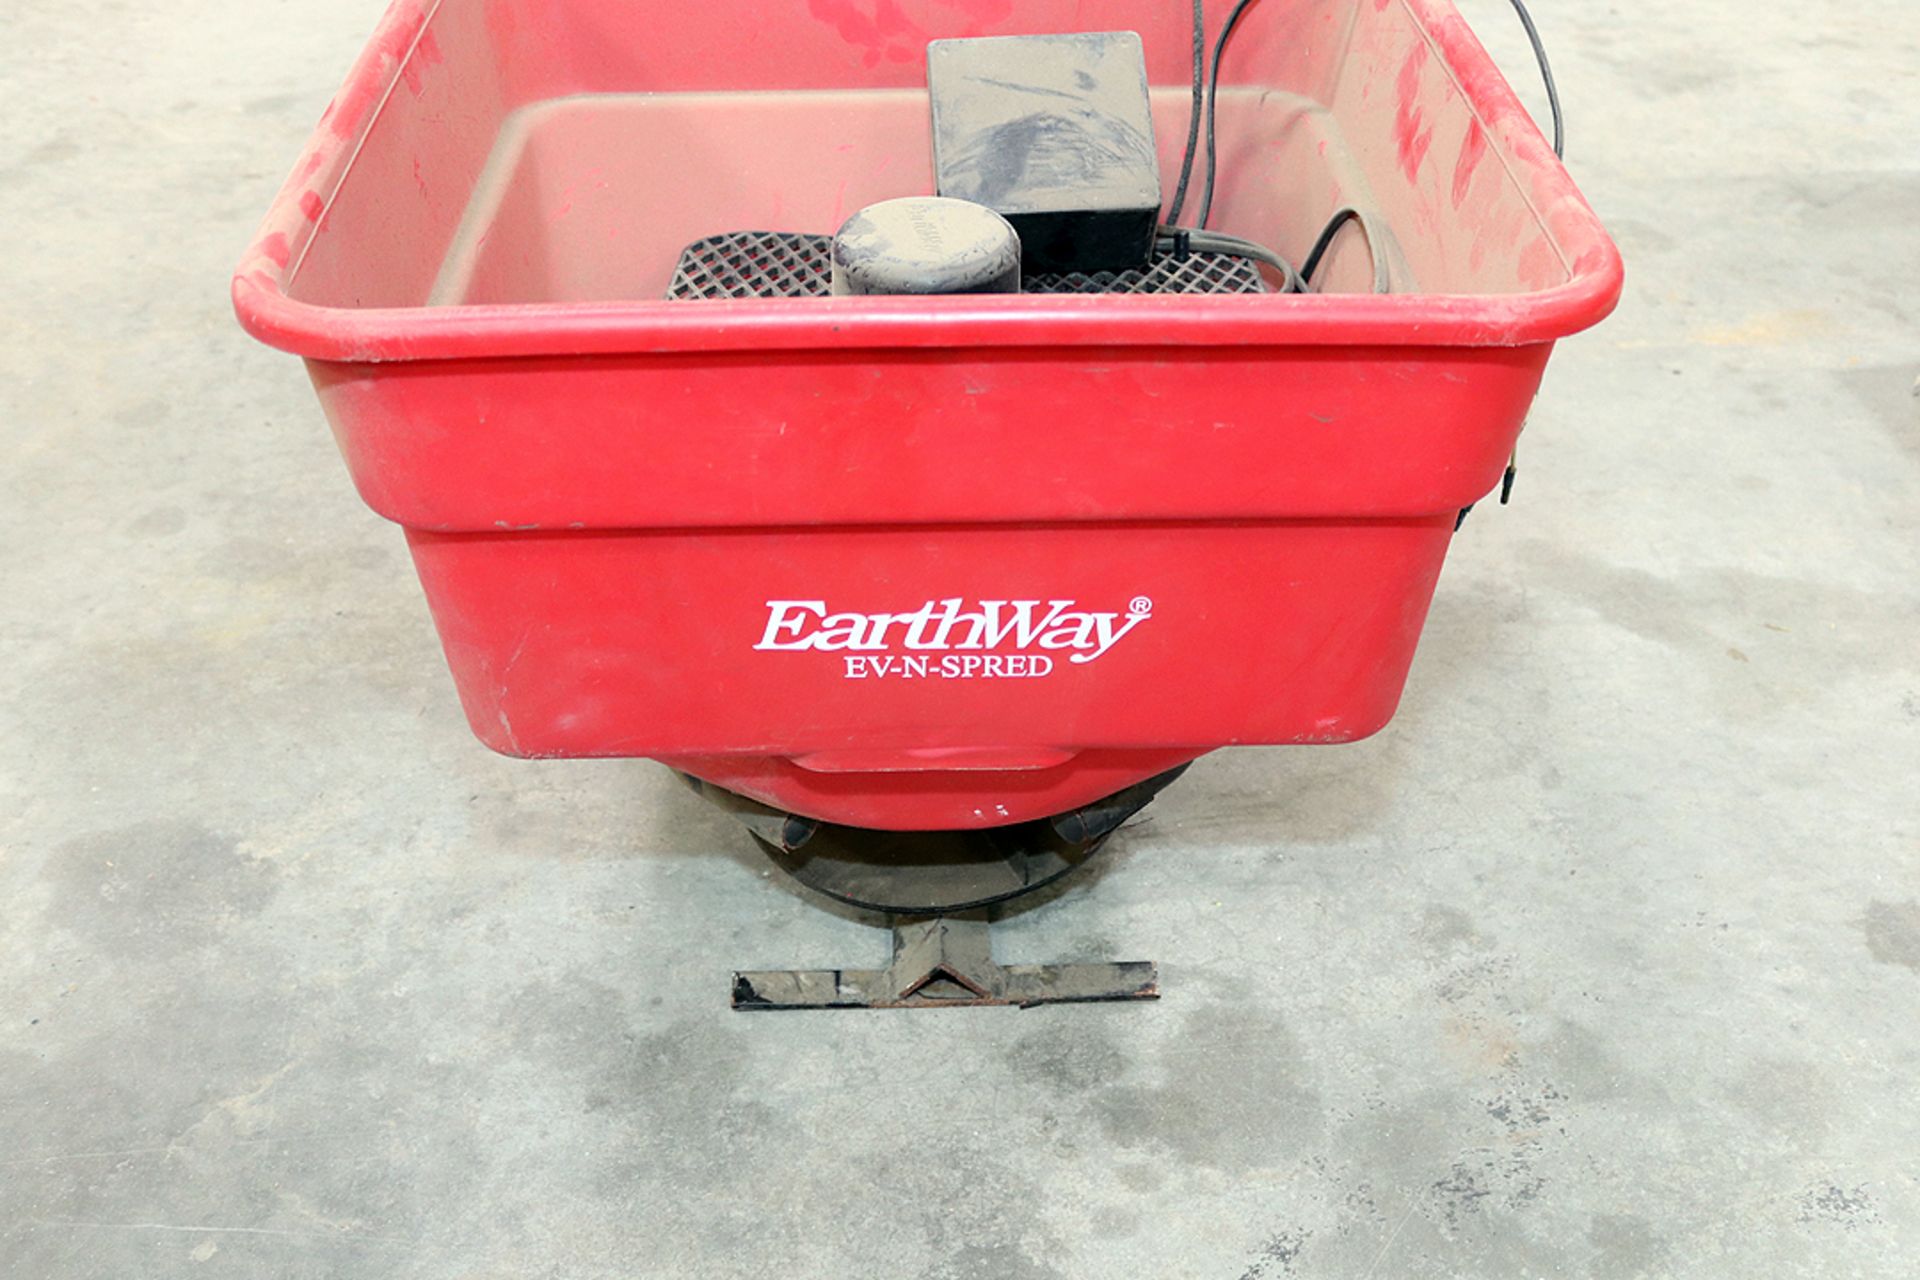 EarthWay Ev-N-Spred Spreader for ATV, Rescue Portable Power Pack and Soldering Gun - Image 3 of 7